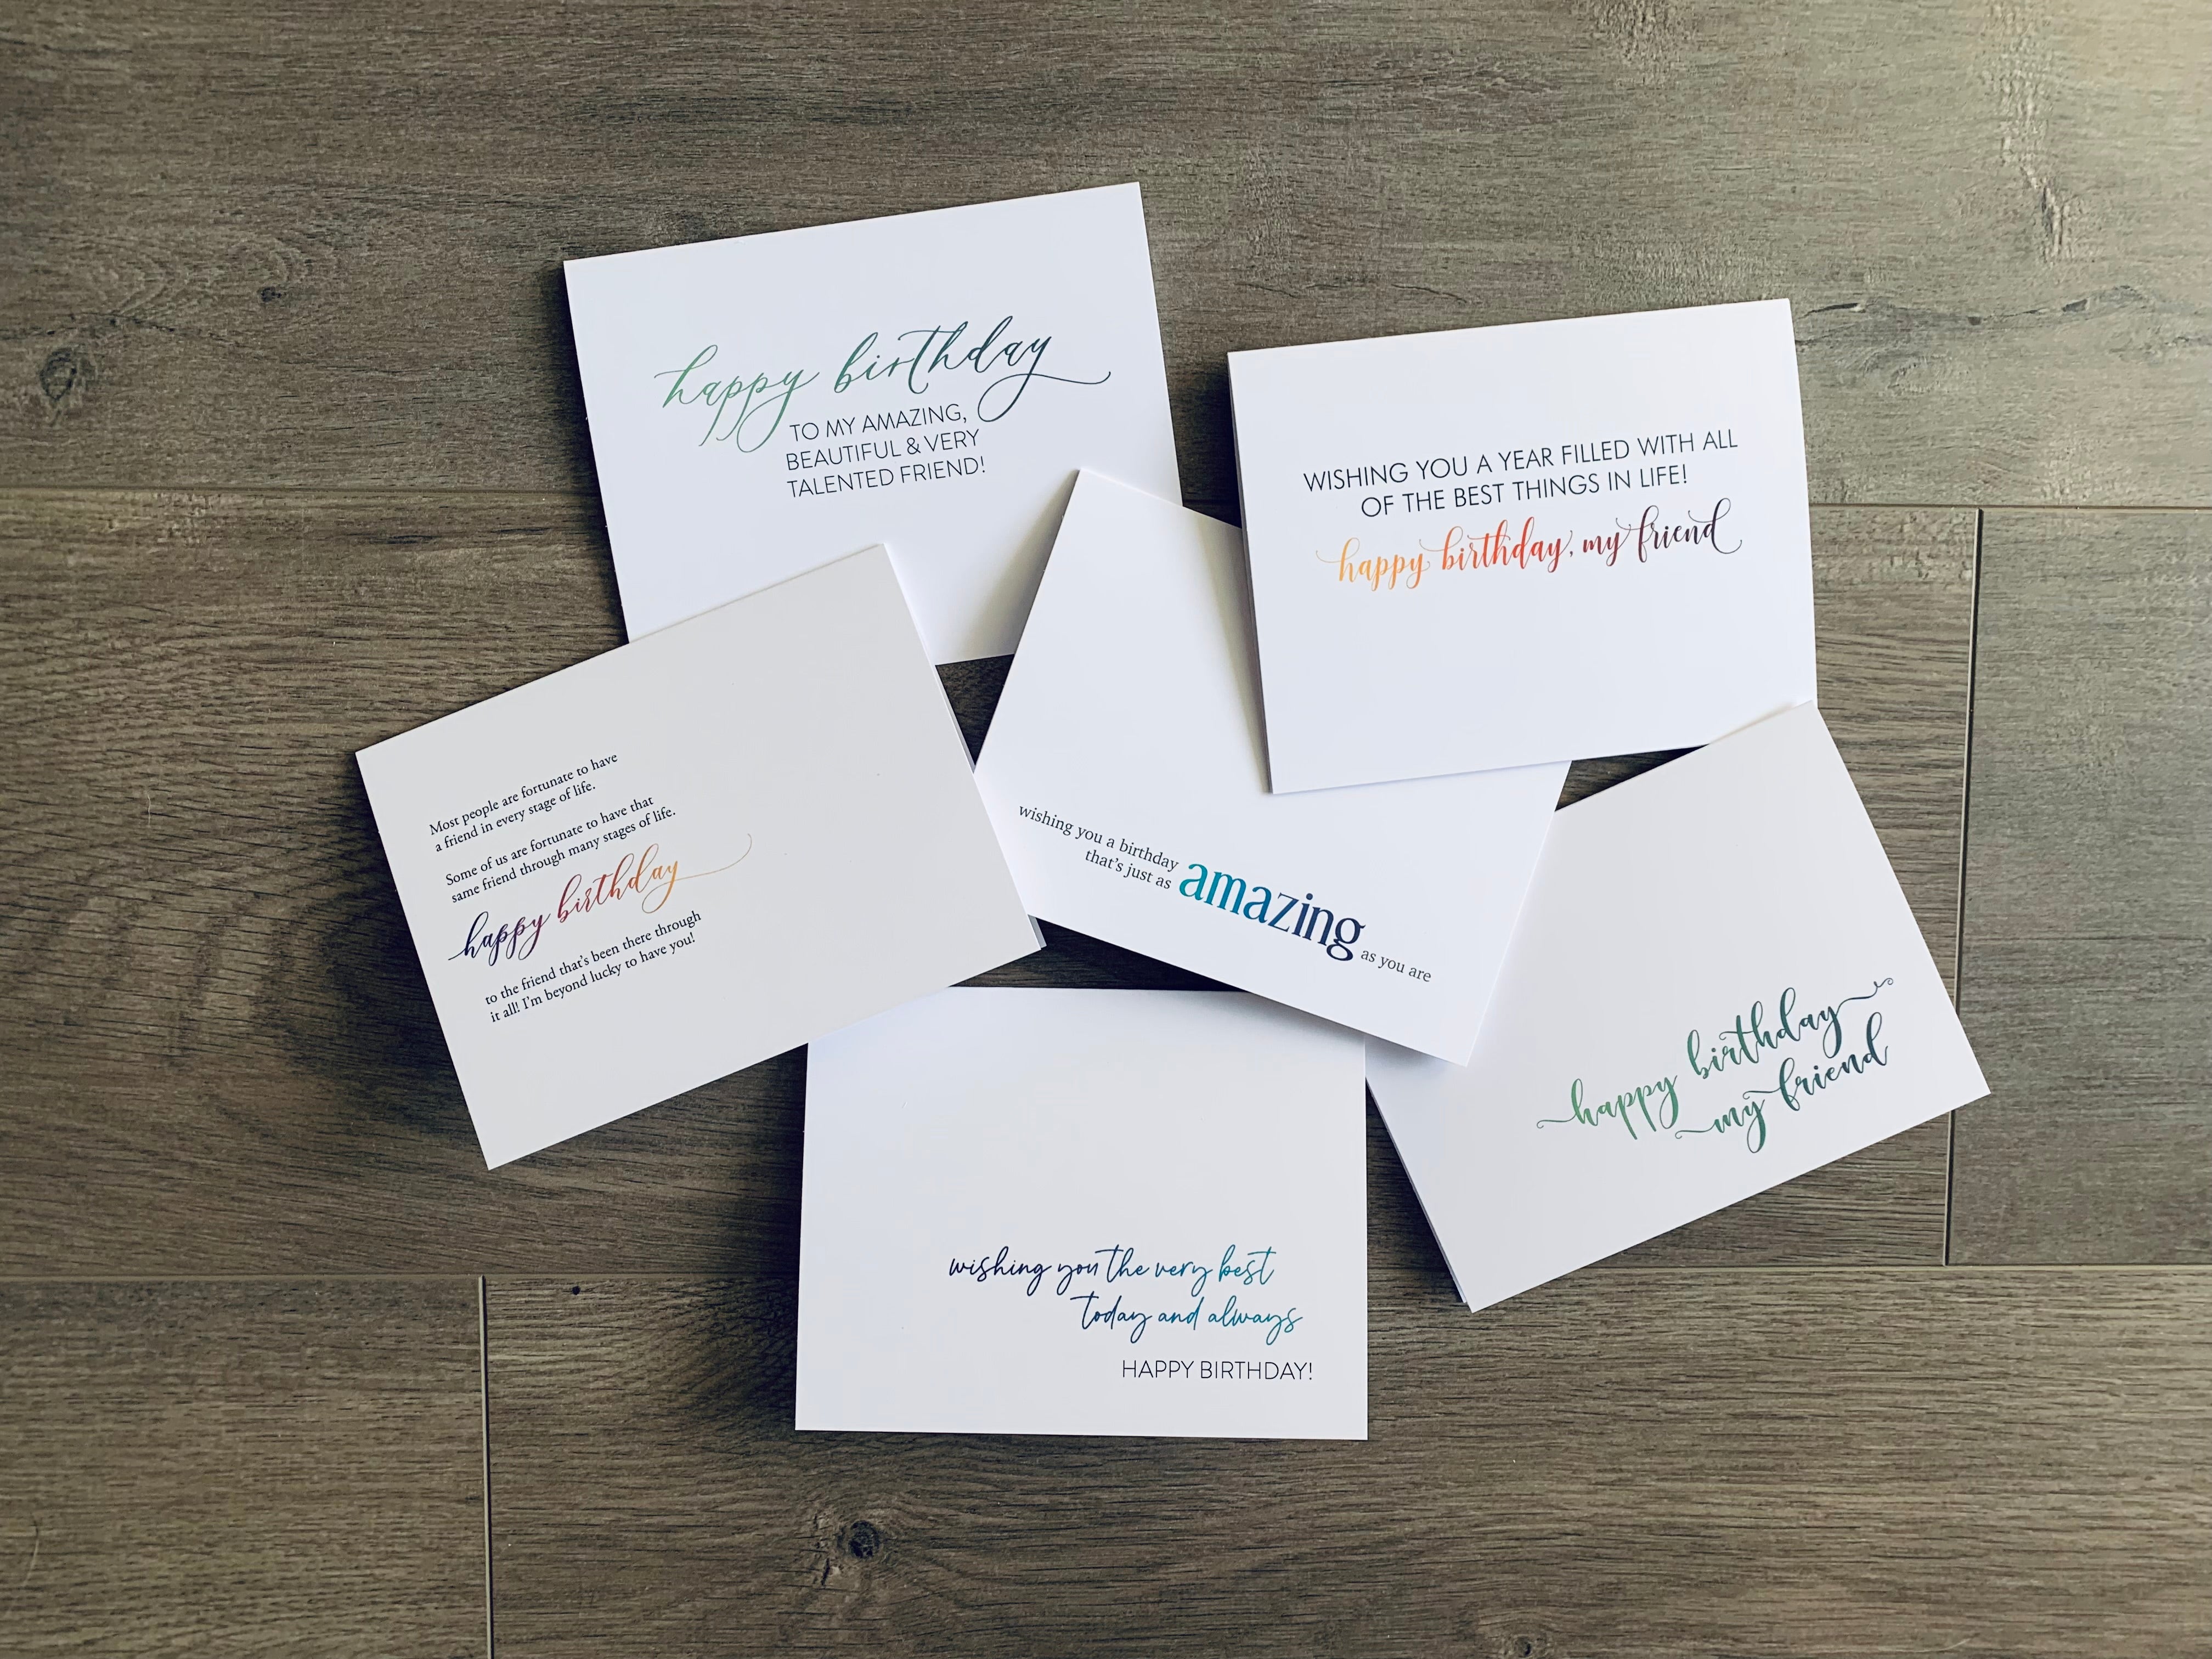 Six white notecards lie on a gray wooden background. Each card has a friendship-inspired birthday sentiment. Friendship Birthday collection by Stationare.